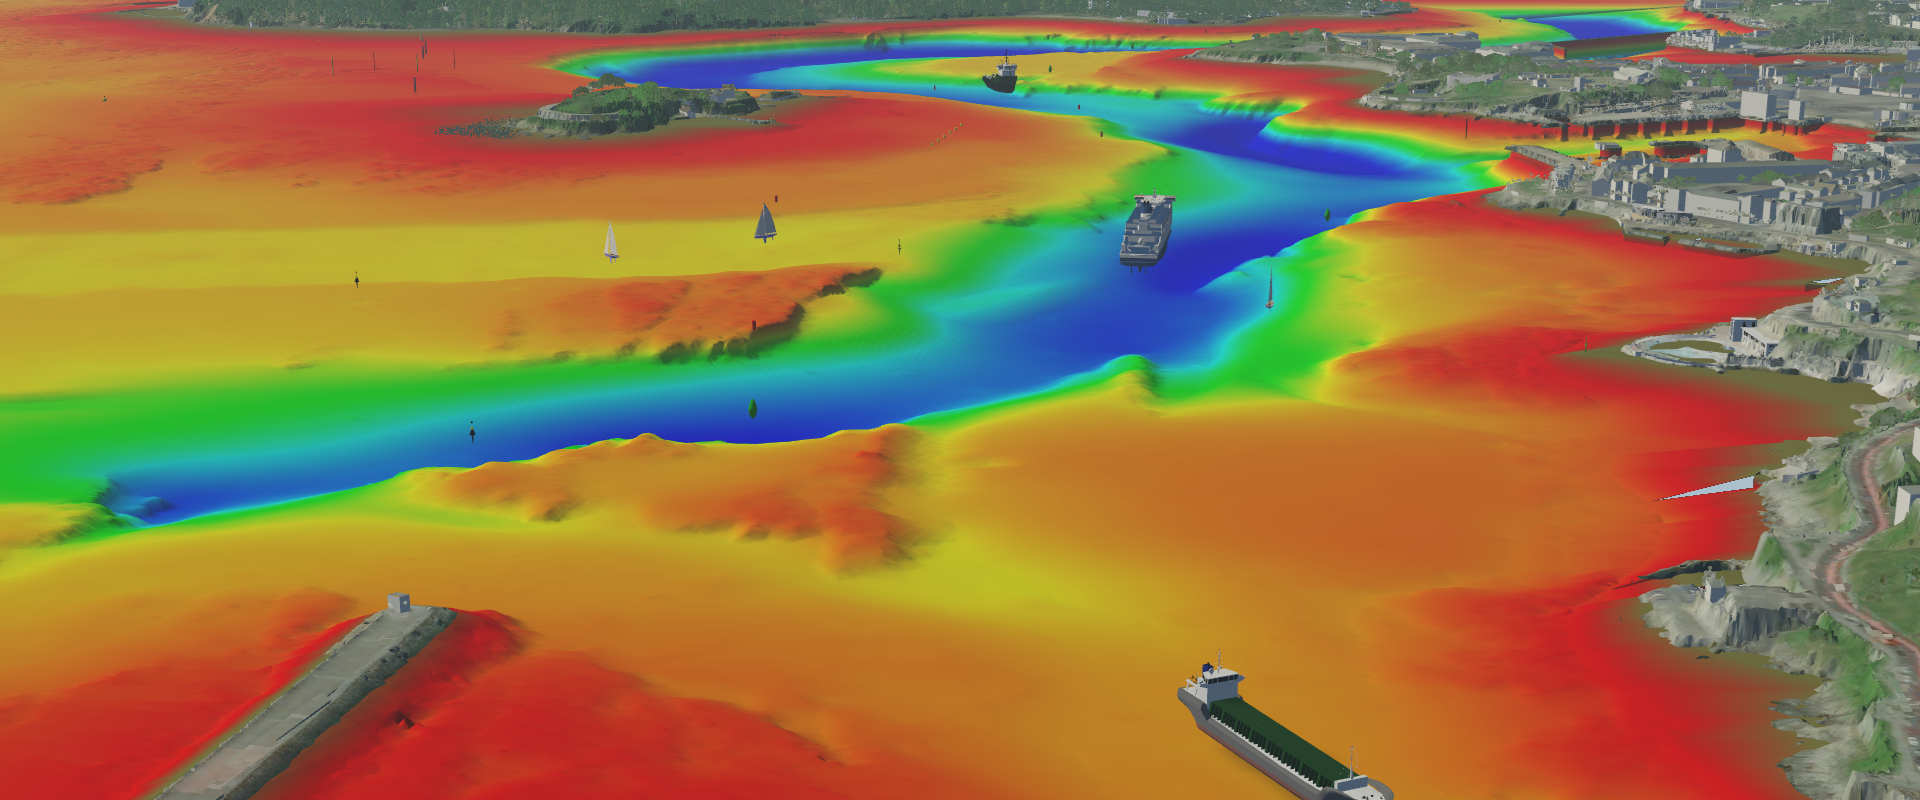 Simulation of maritime environment using BMT REMBRANDT